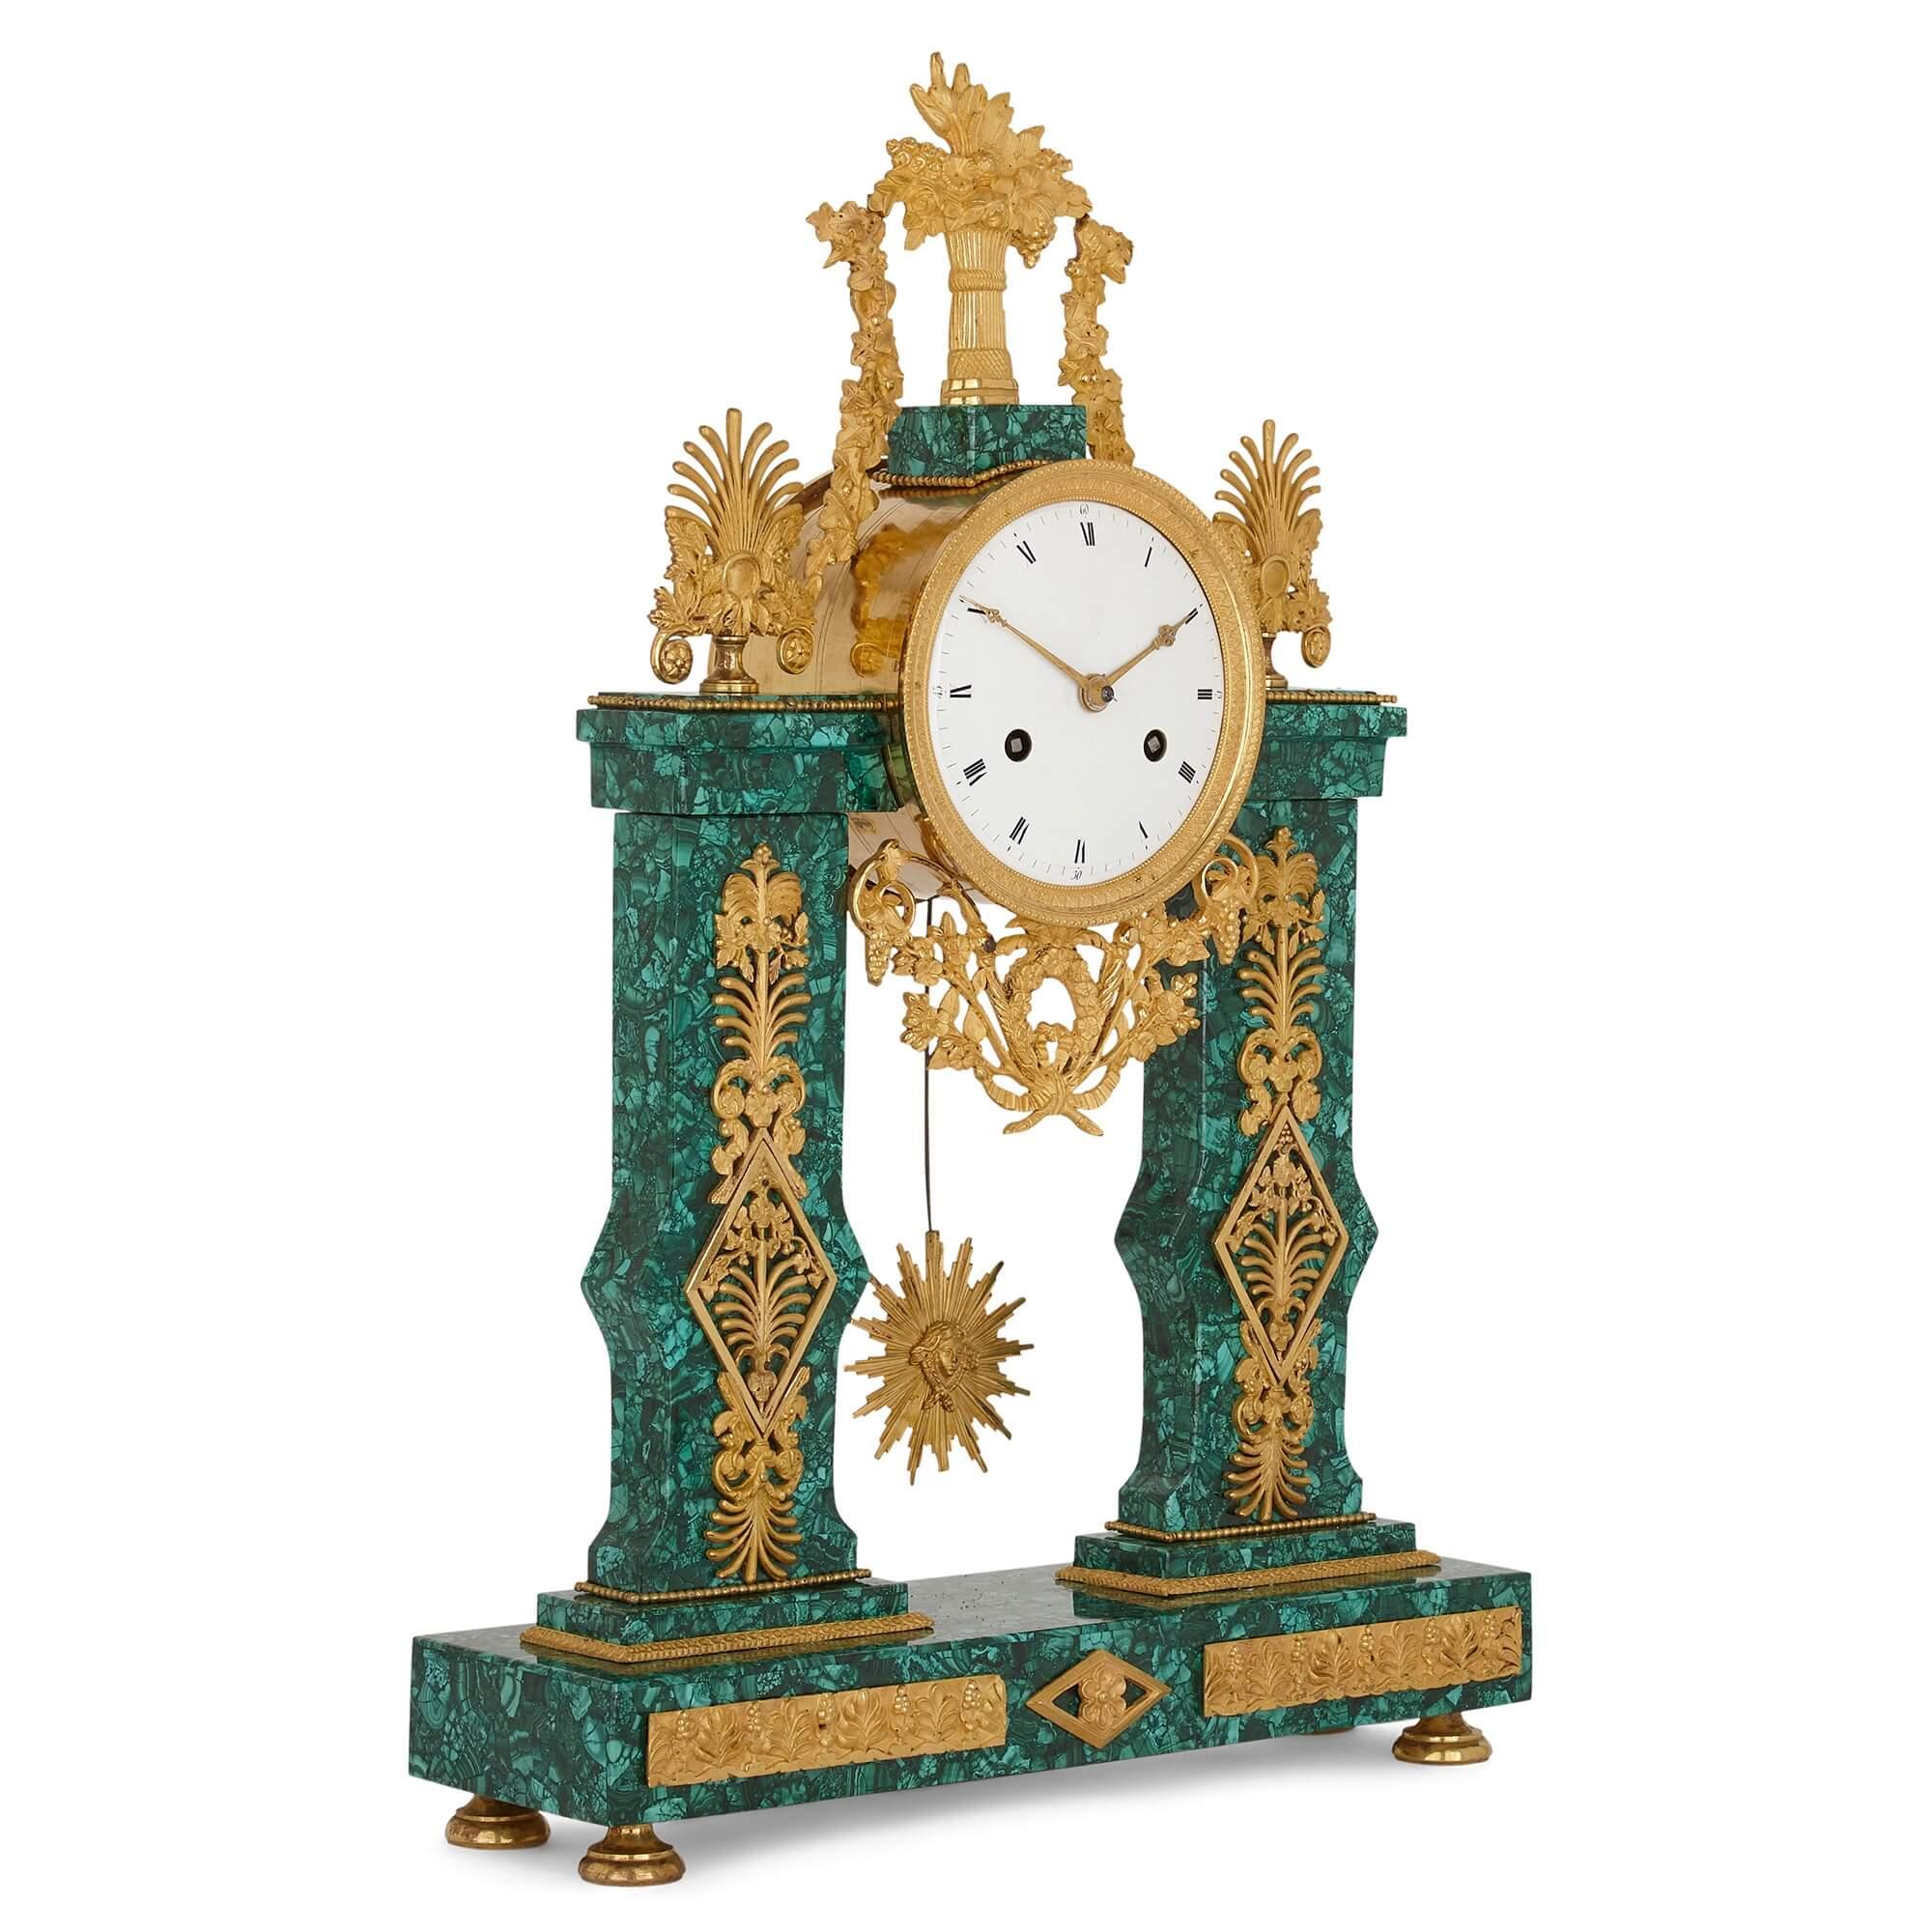 Louis XVI architectural gilt bronze and malachite clock
French, late 18th century
Measures: Height 53cm, width 35.5cm, depth 11cm

Crafted from ormolu and a later malachite veneer, this refined Louis XVI period mantel clock is designed in a